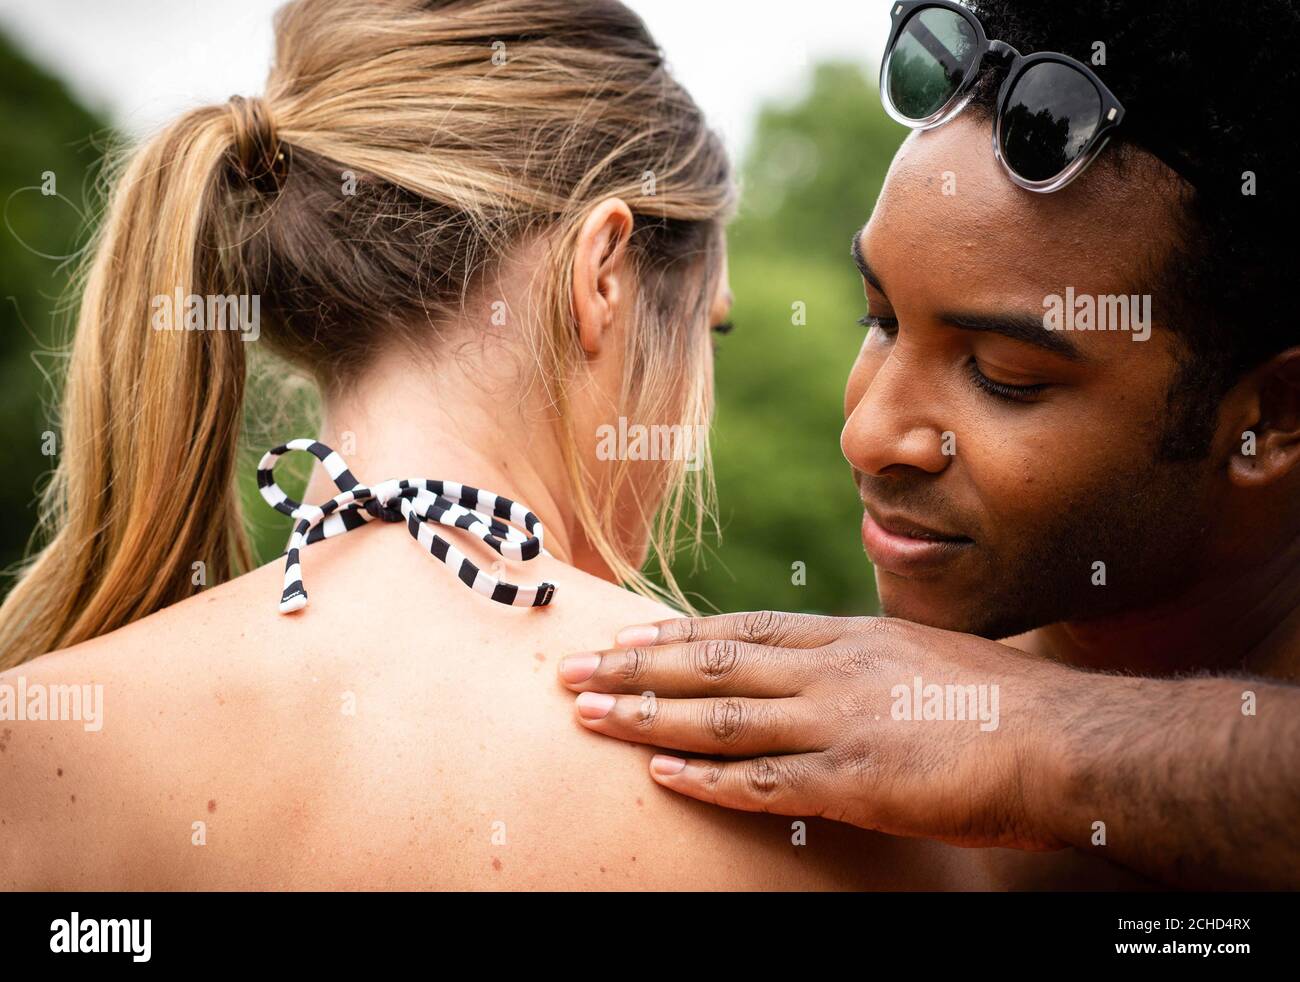 To celebrate the summer and highlight the importance of skin safety, Boots UK is encouraging the British public to 'have each other's backs' and work together to keep safe when it comes to sun protection and checking for signs of melanoma. Stock Photo